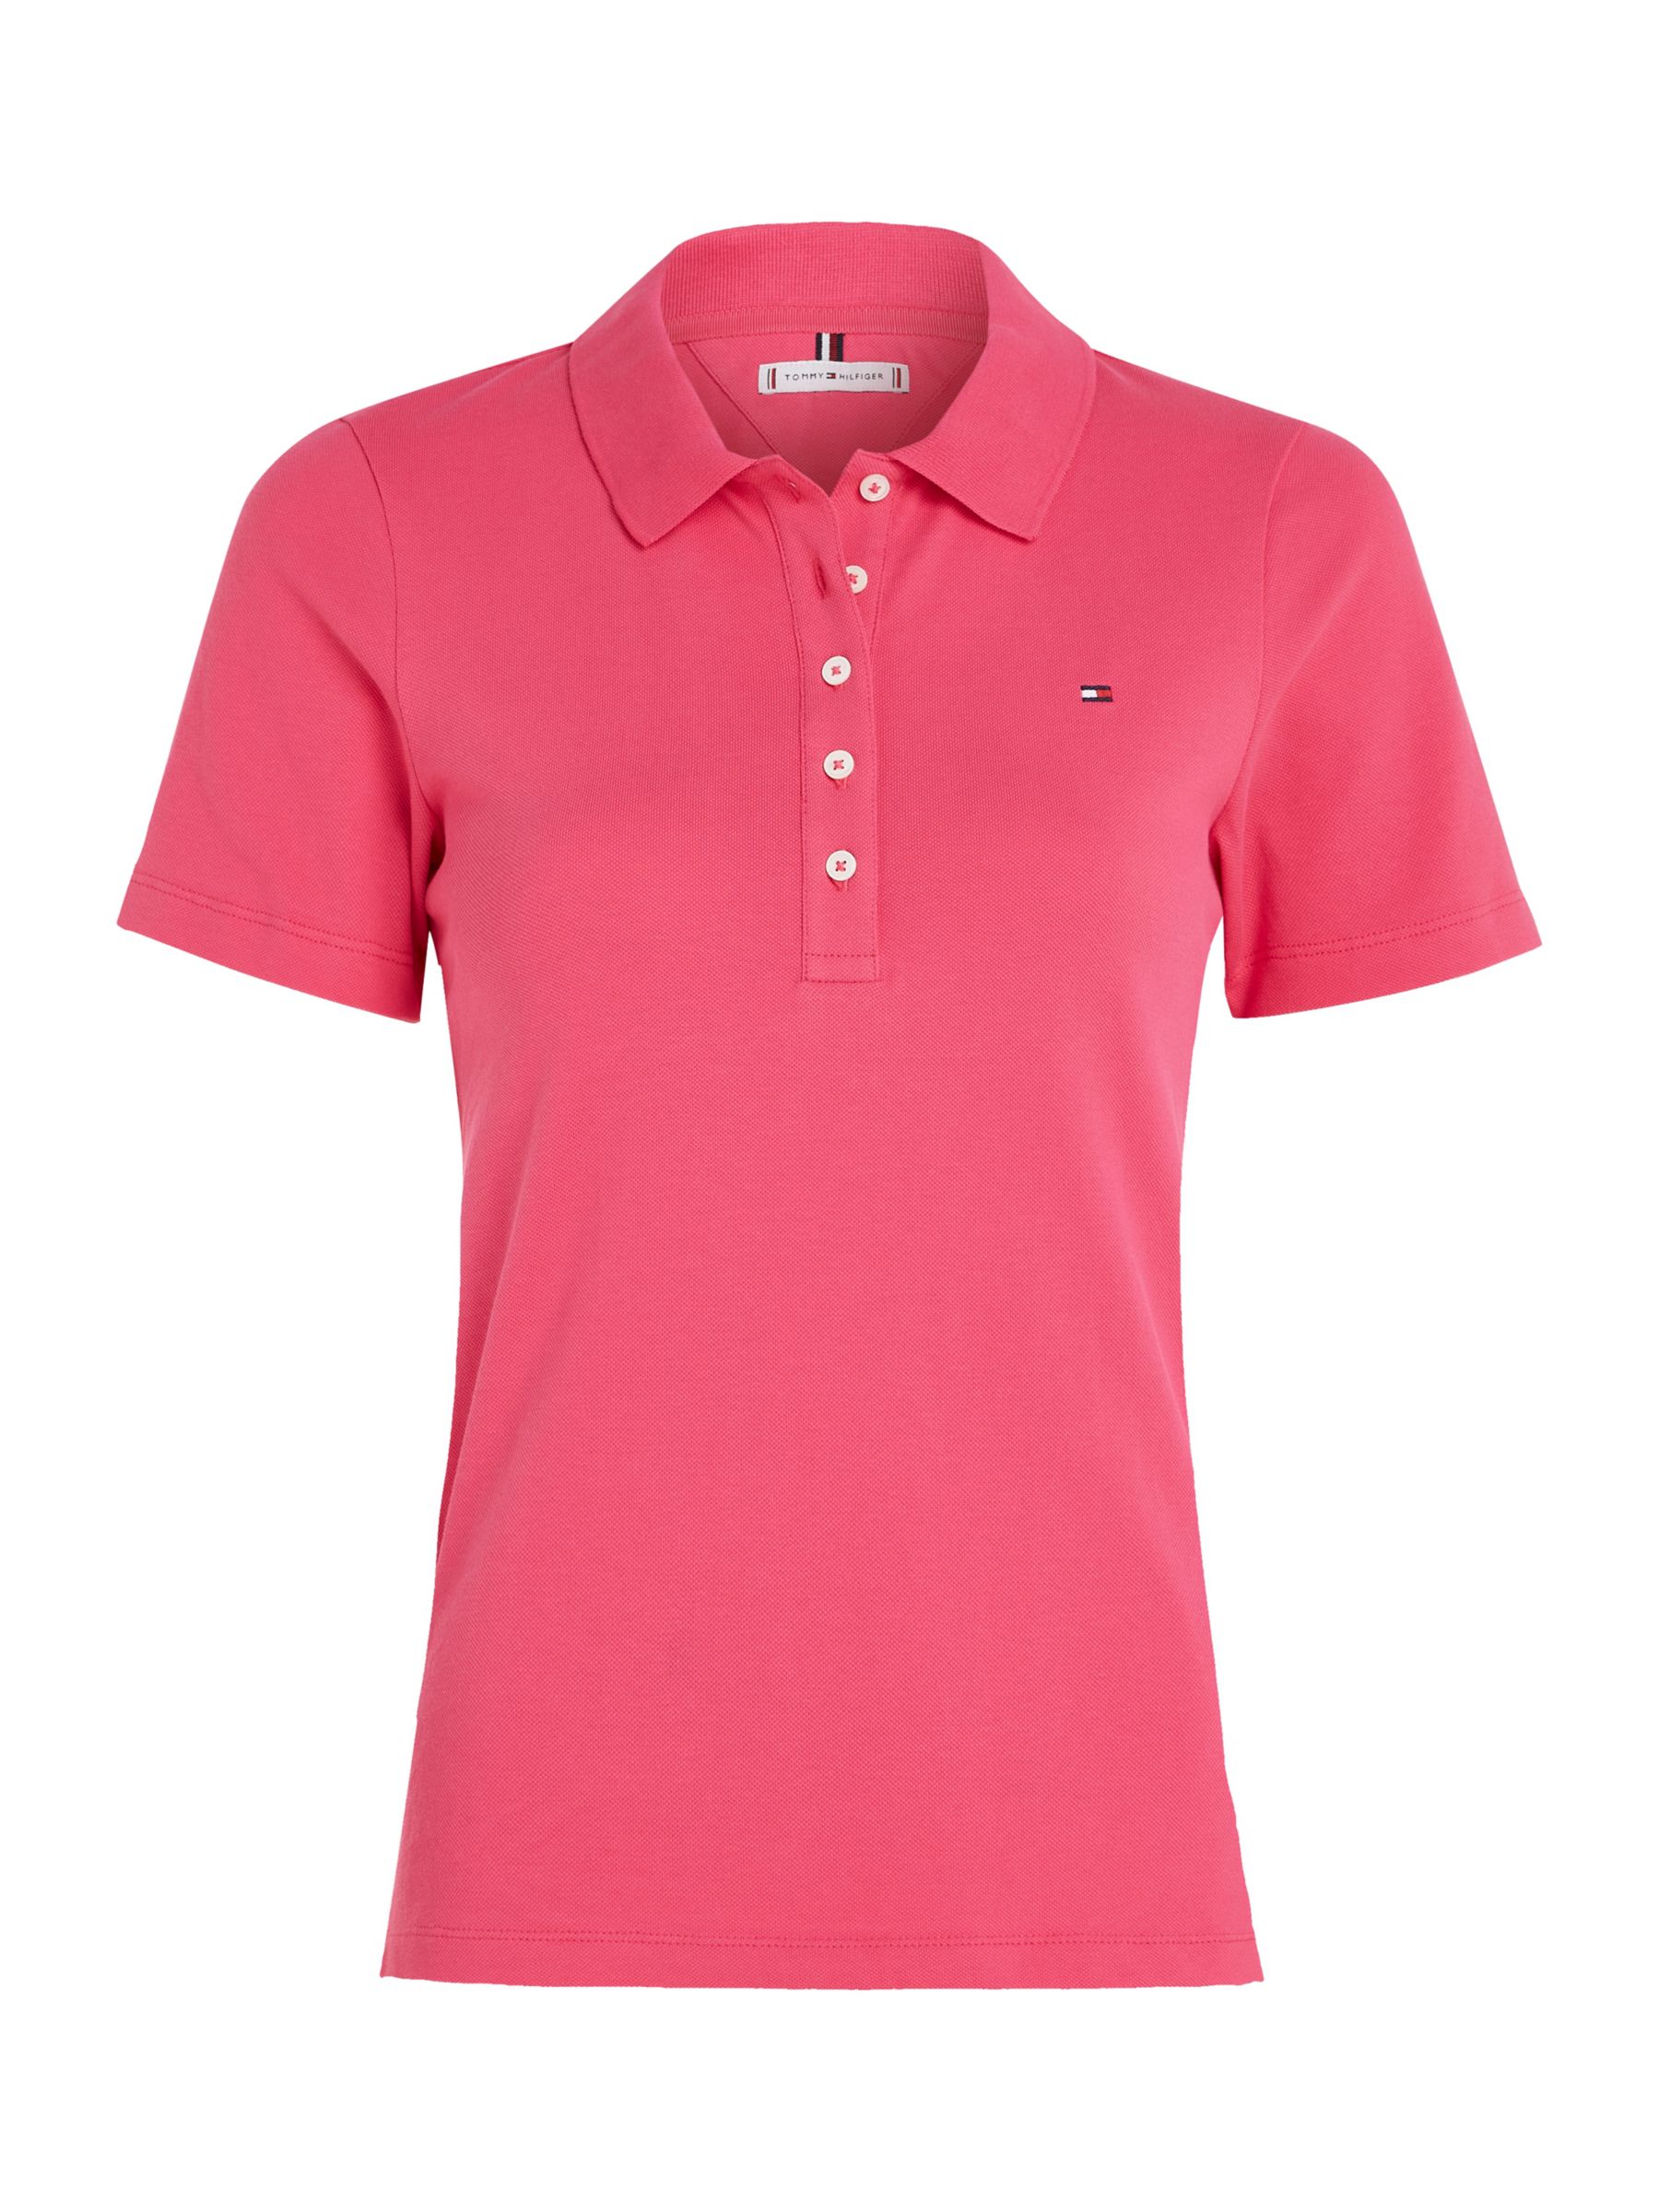 Tommy Hilfiger Classic 1985 Slim Fit Pink Polo Shirt - Clothing